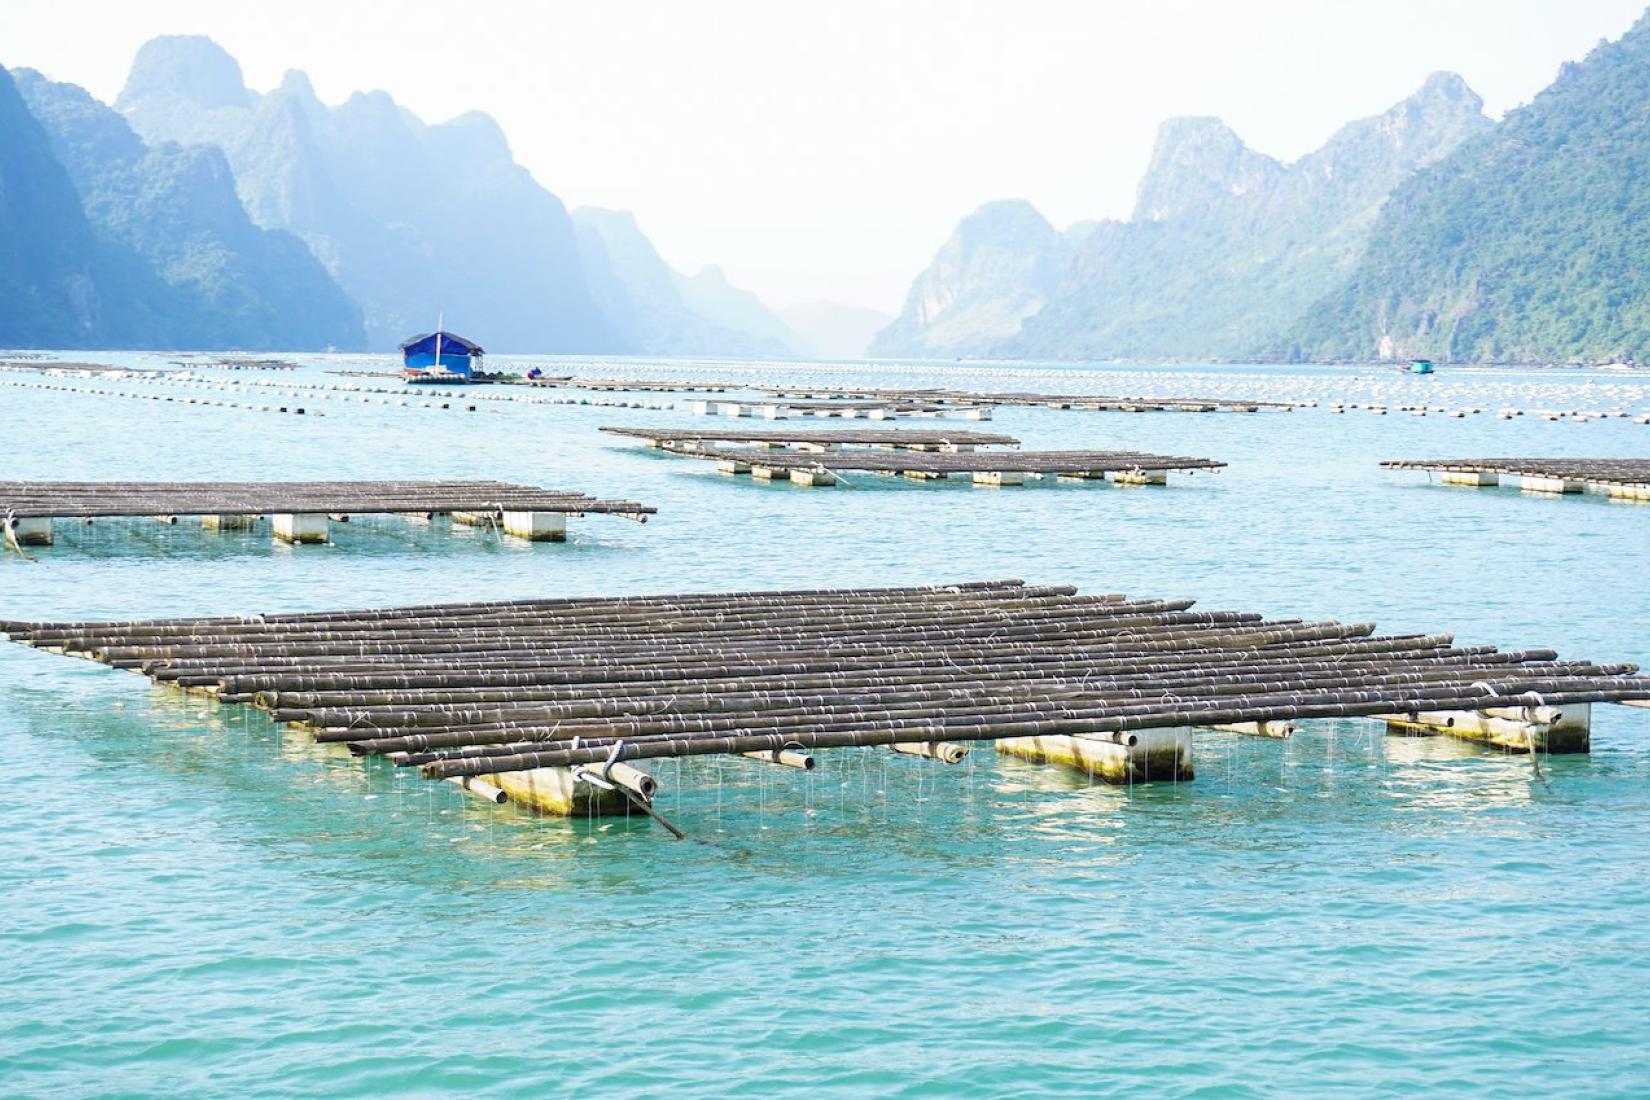 Many floating oyster farms in the ocean - large panels of logs with lines hanging into the water